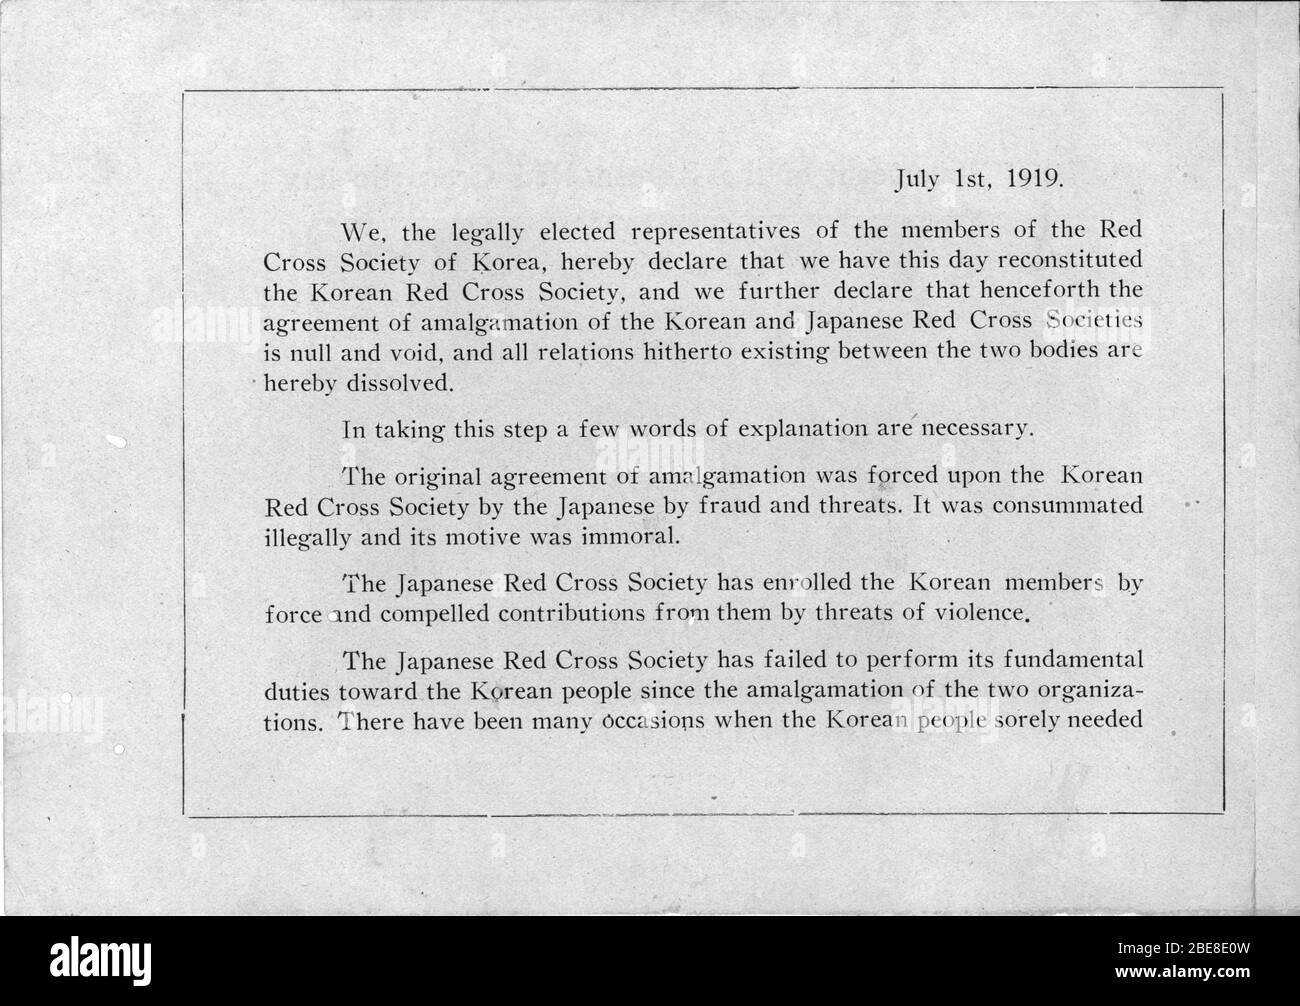 "English: [Red Cross Pamphlet on March 1st Movement] Item abstract: Declaration of Independence and Photos Exposing Japanese Soldiers' brutal; Volume abstract: Hyon Sun's biographical poems, photos, a Declaration of Independence and Booklet Exposed Japanese Soldiers' brutality.; Original Version of Filename: Kada-shyun15-01215-012;15yada-15-012;;15schun--012;;15schada-+12;15-012;;15SCHADA-+12;  15-012;  ; +12; +12; +12; +12; +12; +12; +12; +12; +12; +12; +1; +12; +12; +1-012; +12; +12   Kada-shyun15-01211; KADA-shyun15-01212; KADA-shyun15-01213; KADA-shyun15-01214 Stockfoto